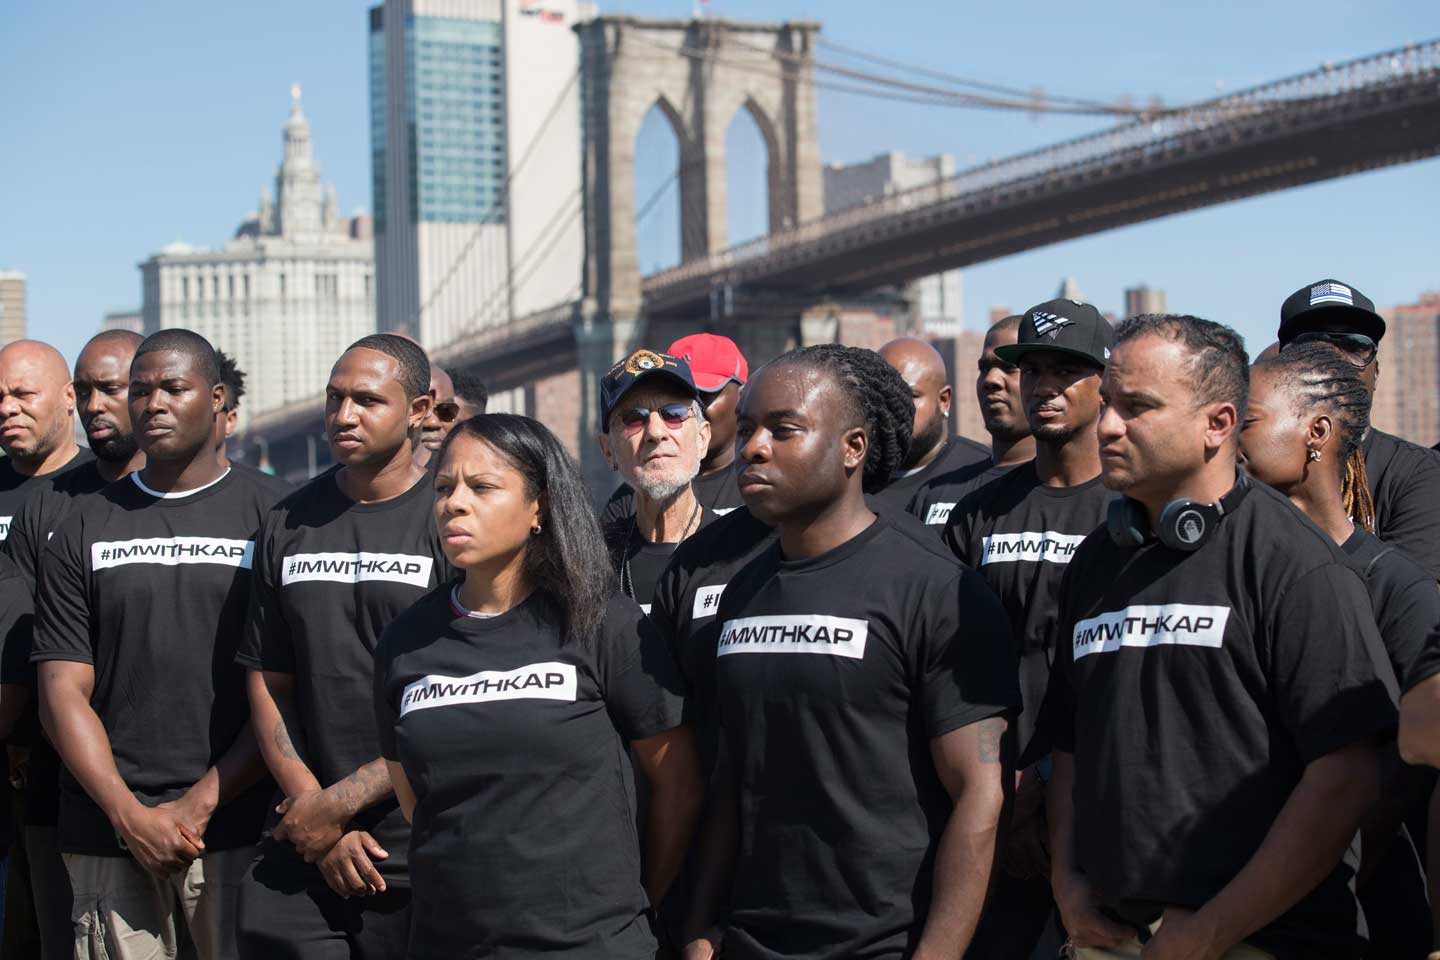 Retired New York City Police Officer Frank Serpico, center, stands with other members of law enforcement during a rally to show support for Colin Kaepernick, Saturday, Aug. 19, 2017, in New York. Kaepernick, the former quarterback for the San Francisco 49ers, became a controversial figure last year after he refused to stand for the national anthem. He said it was a protest against oppression of black people. (AP Photo/Mary Altaffer)